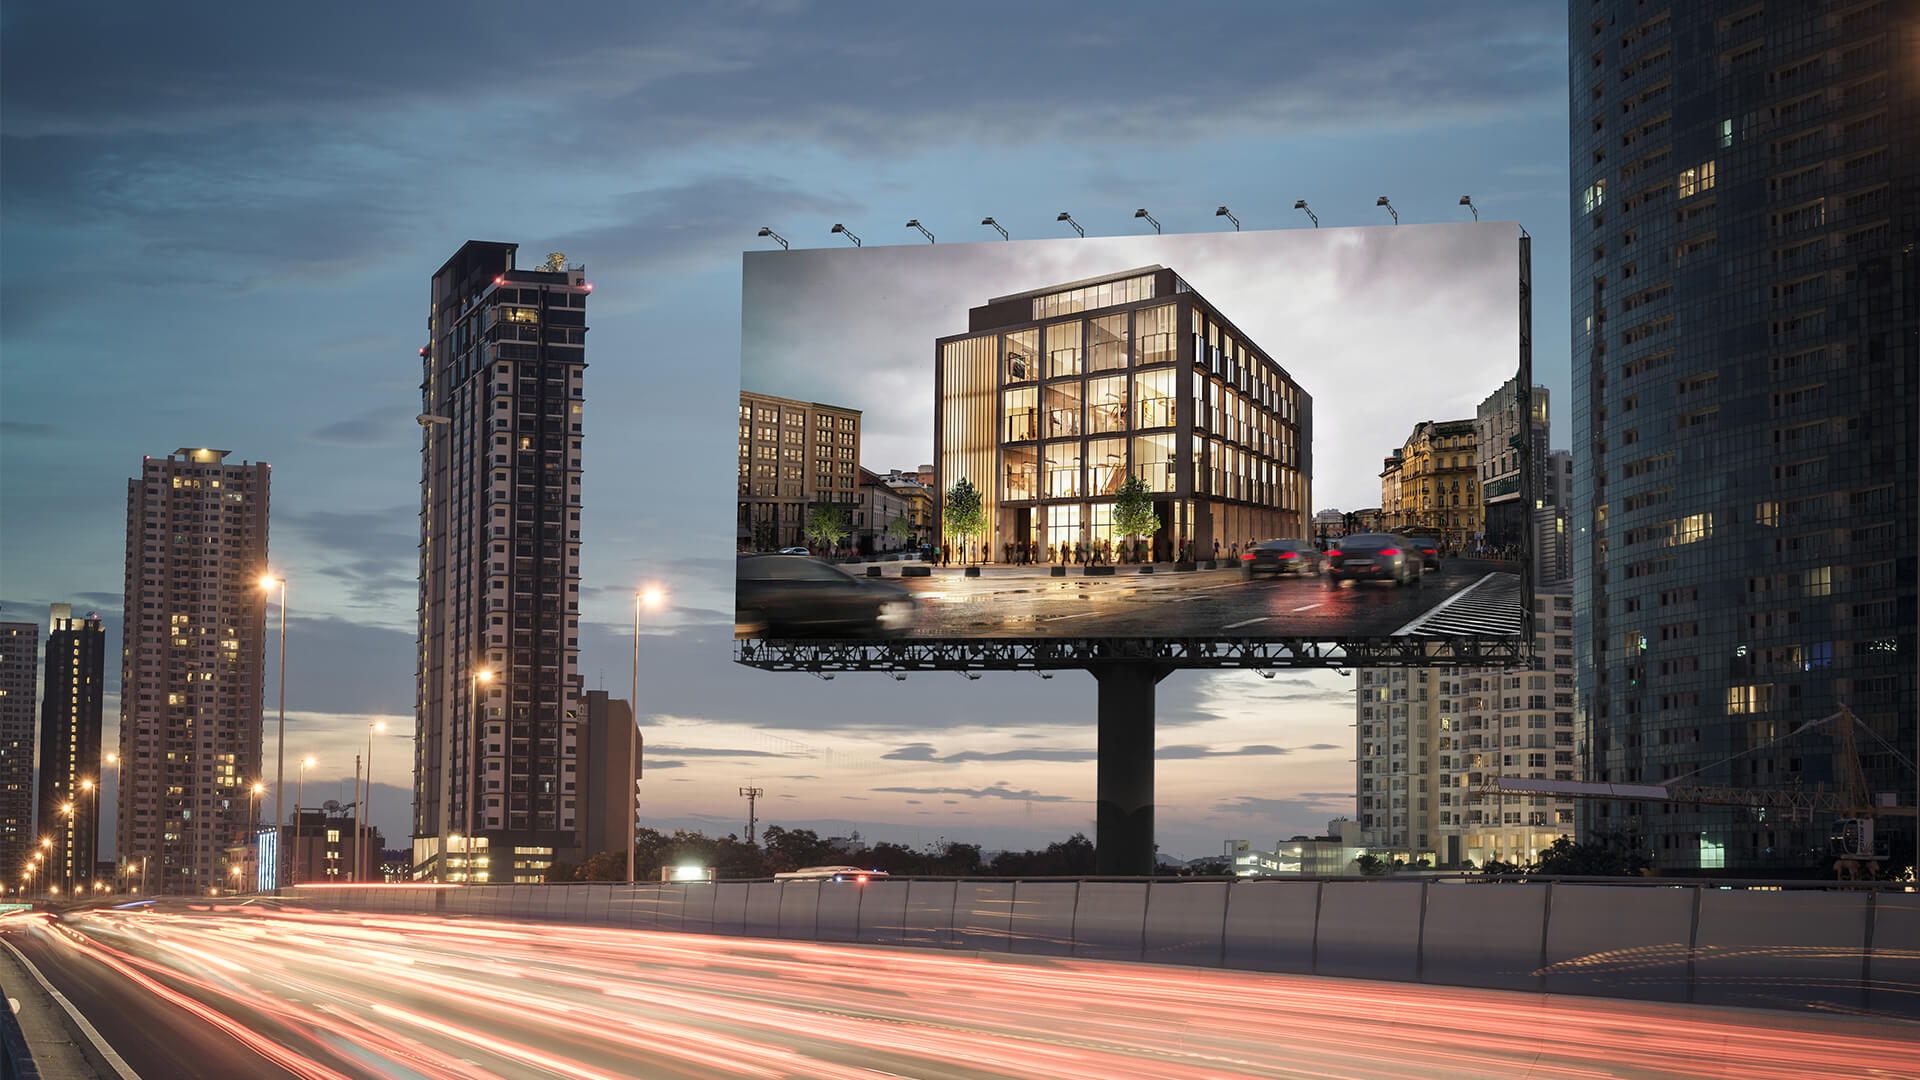 Large Billboard with Architectural 3D Render on a Busy City Road